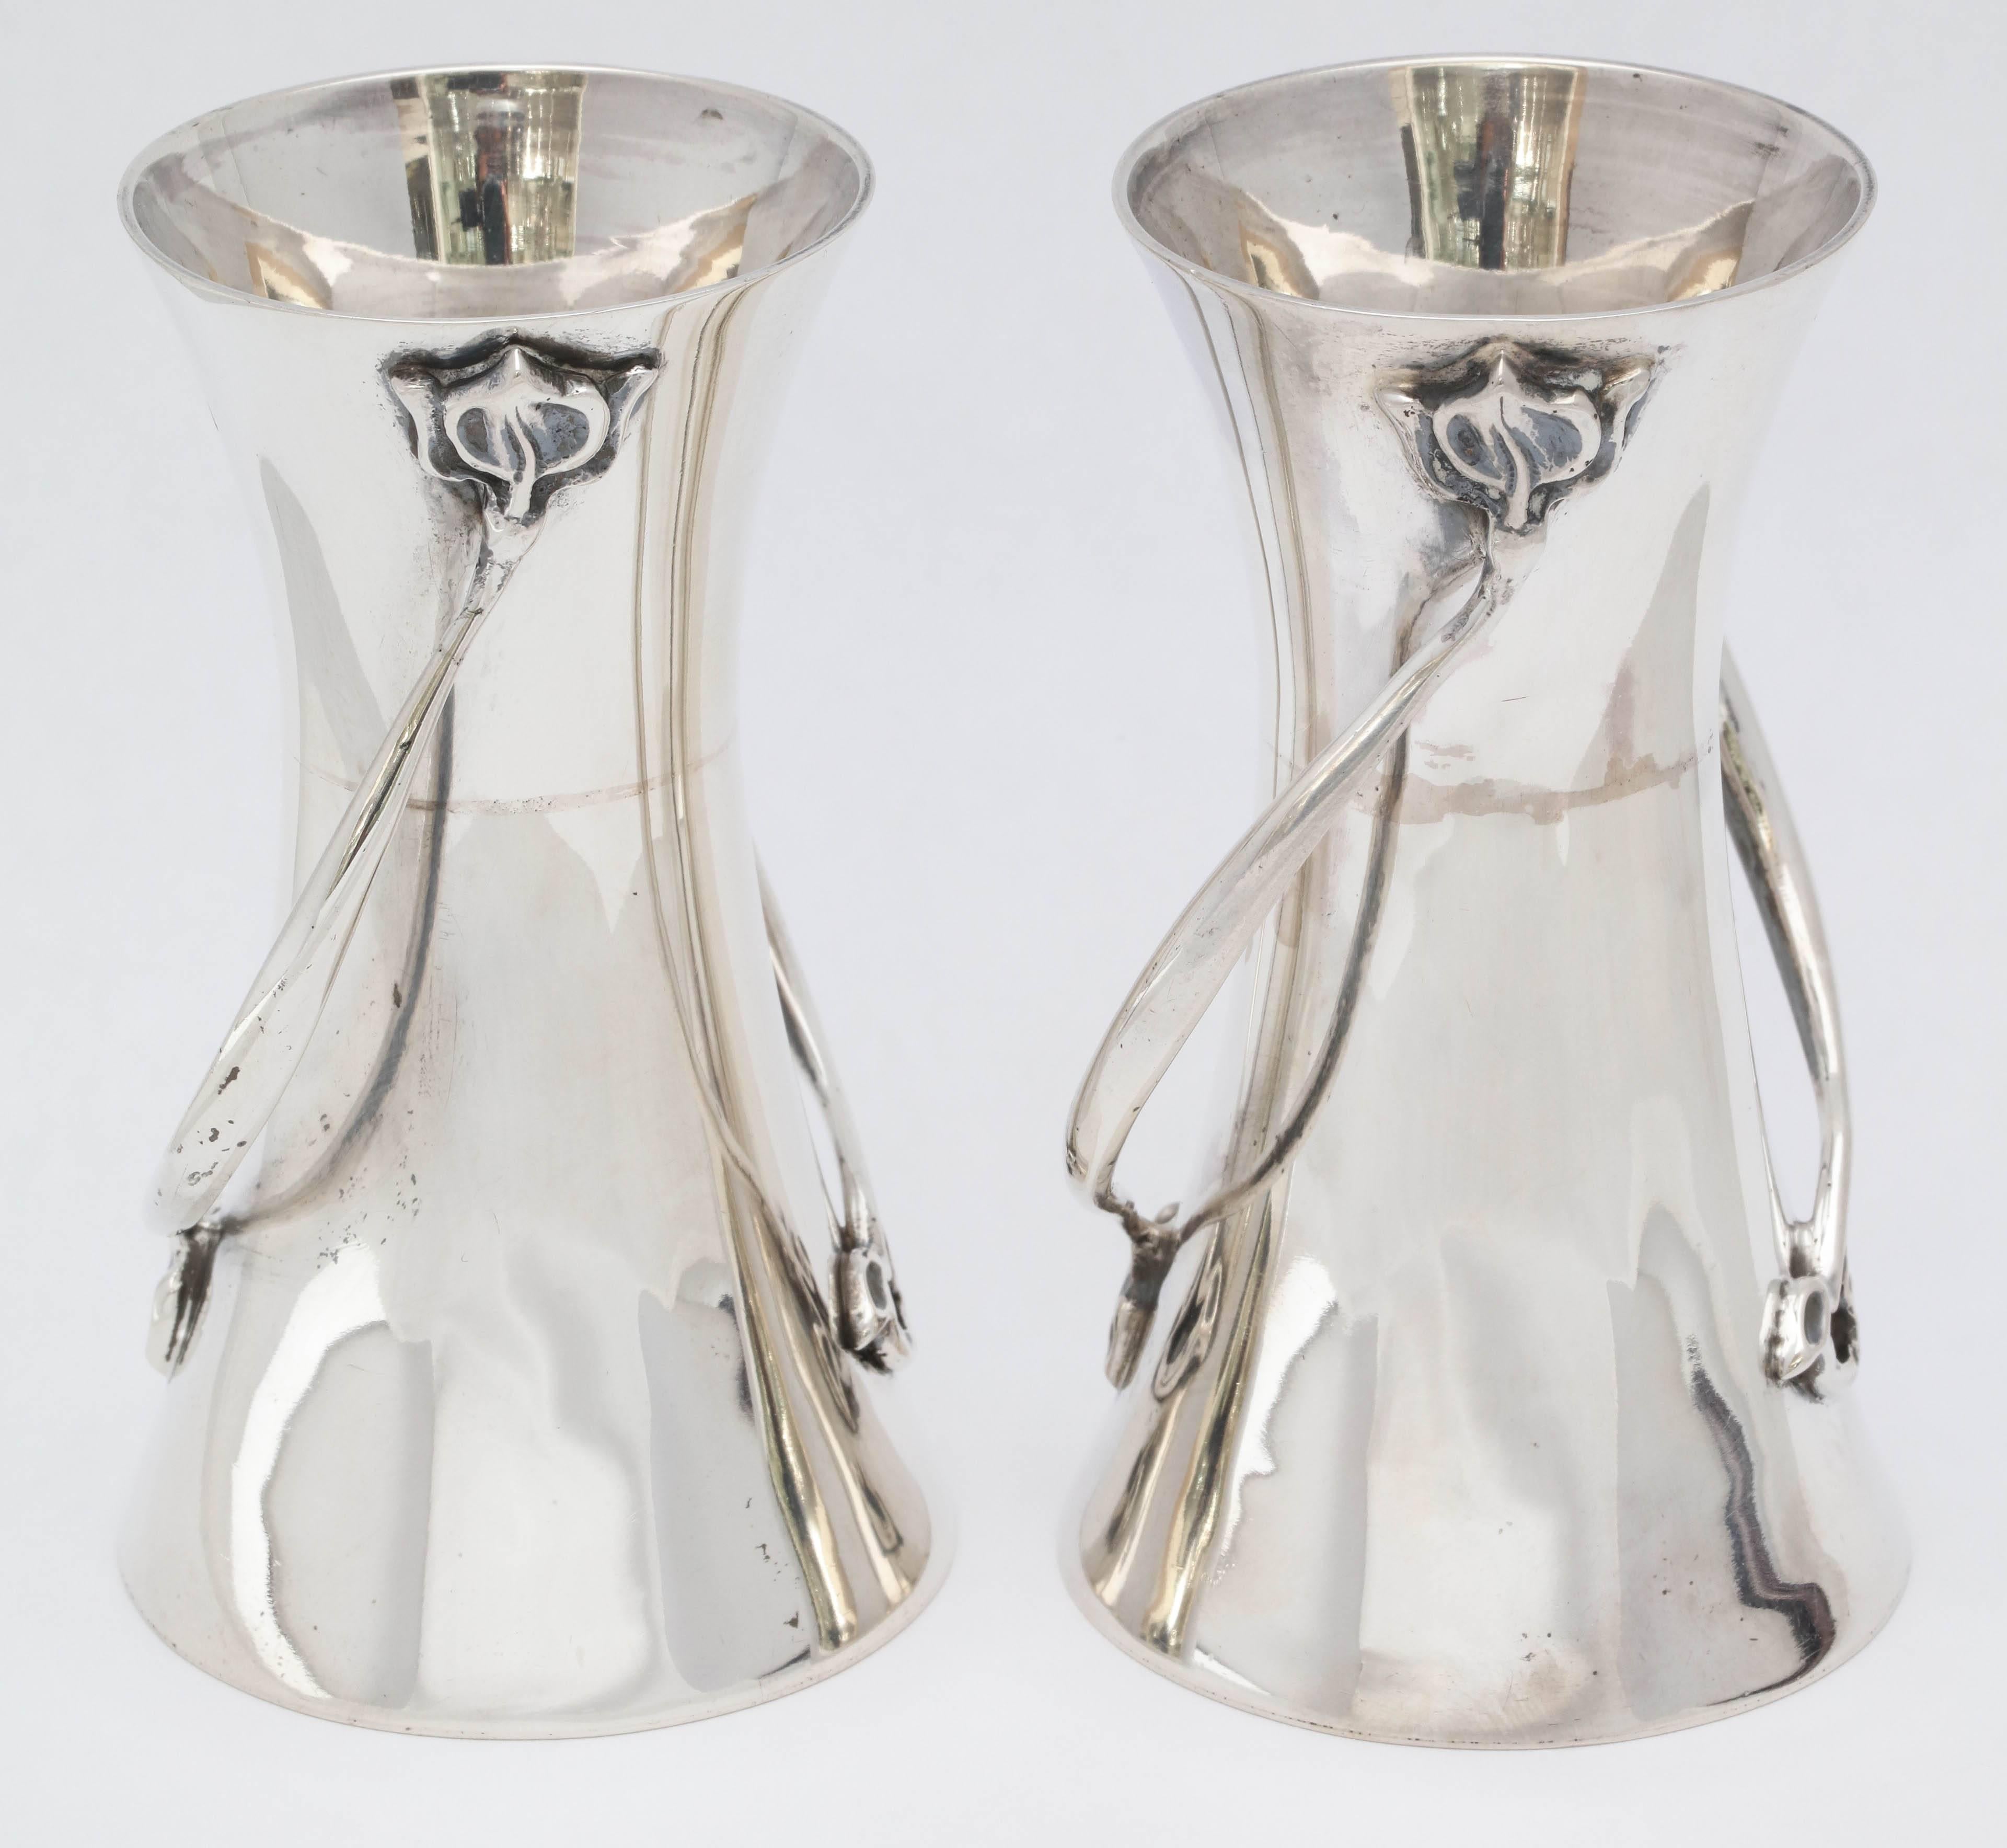 Early 20th Century Rare Pair of Art Nouveau Sterling Silver Bud Vases